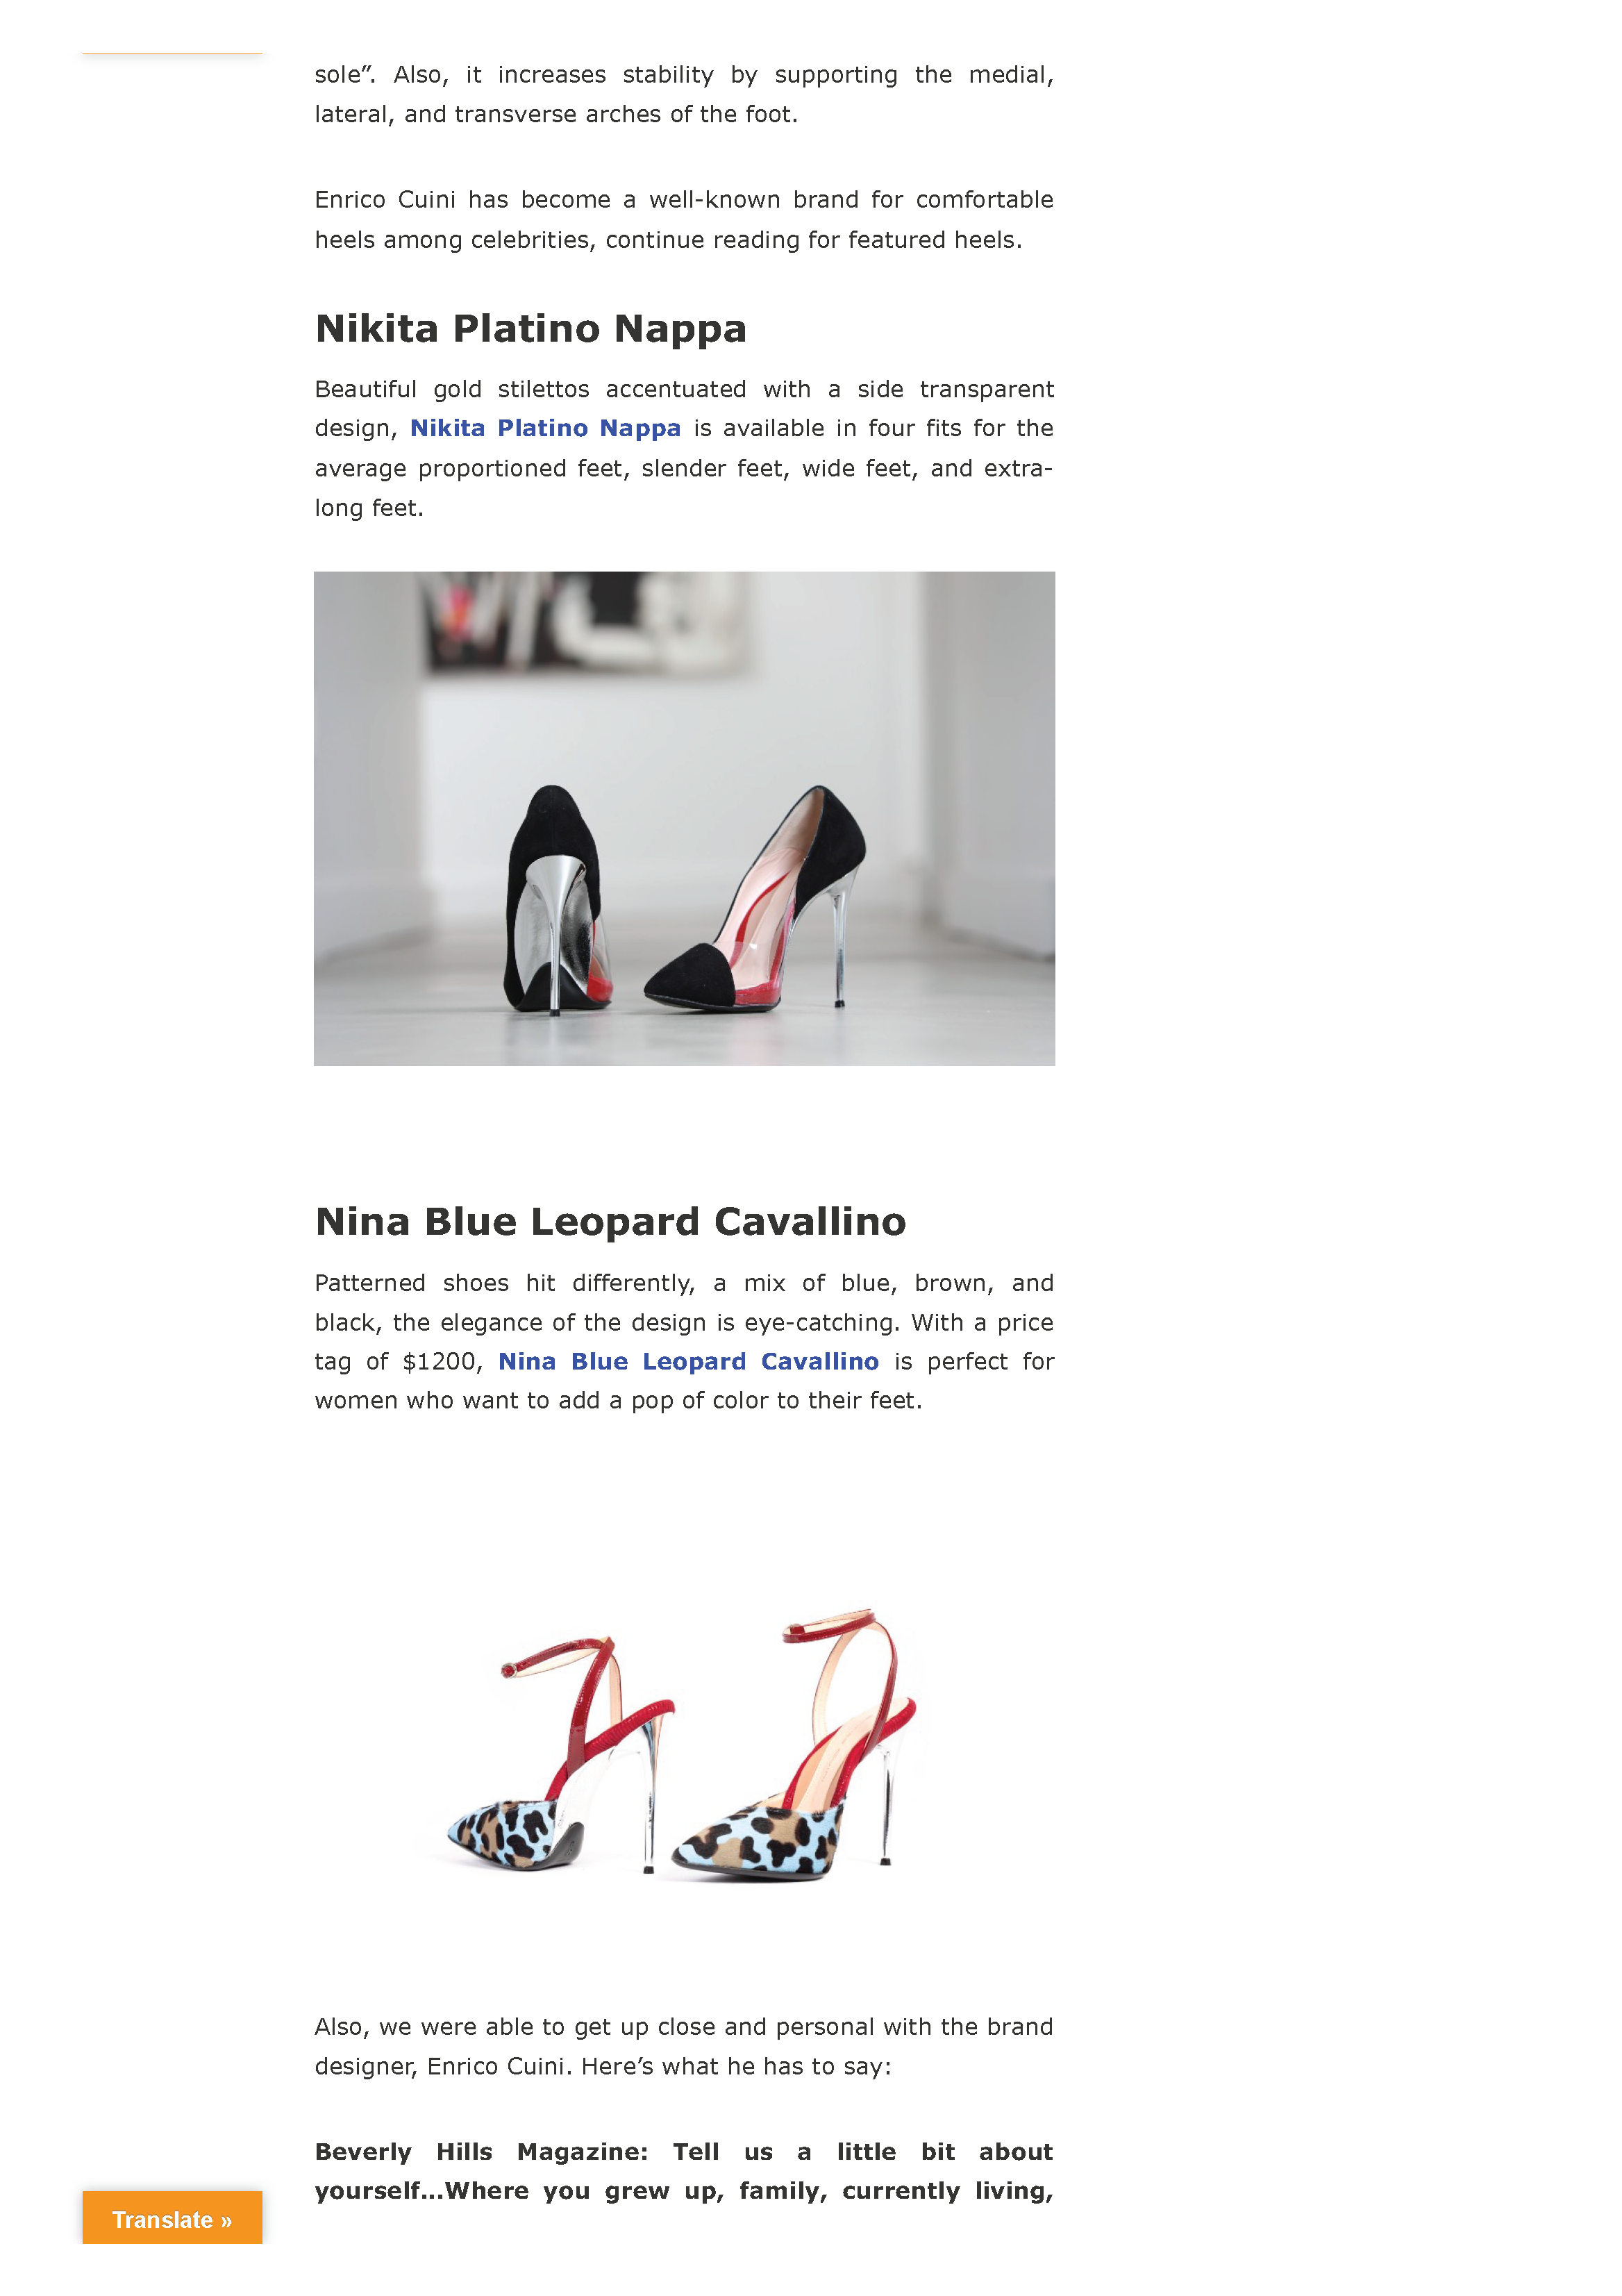 Fashion World_ Enrico Cuini Shoes For Women ⋆ Beverly Hills Magazine_Page_2.png